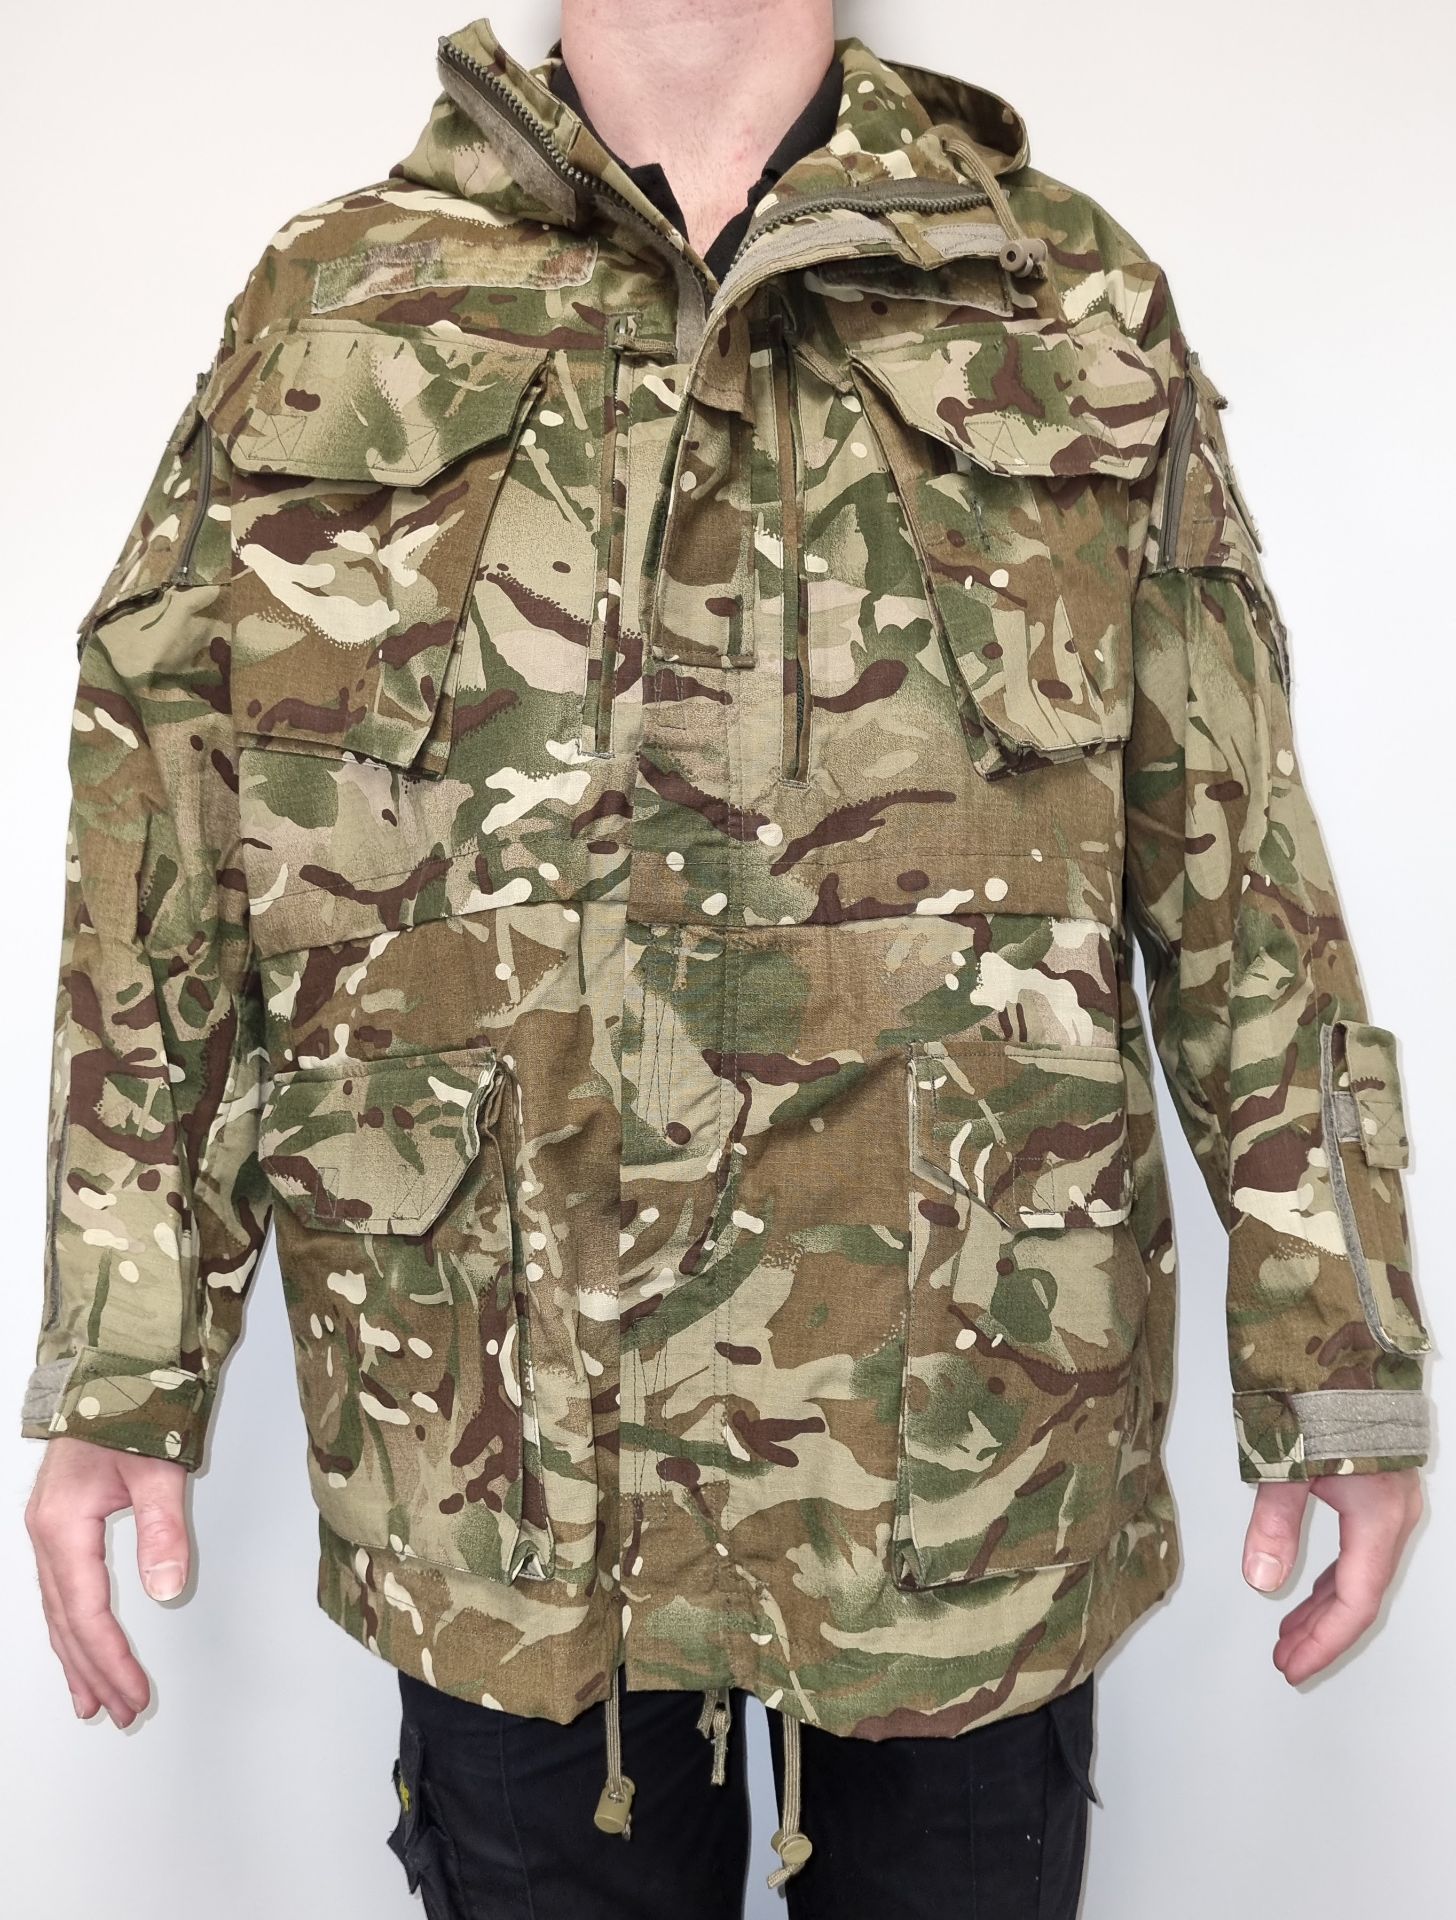 50x British Army MTP windproof smocks - mixed grades and sizes - Image 3 of 9